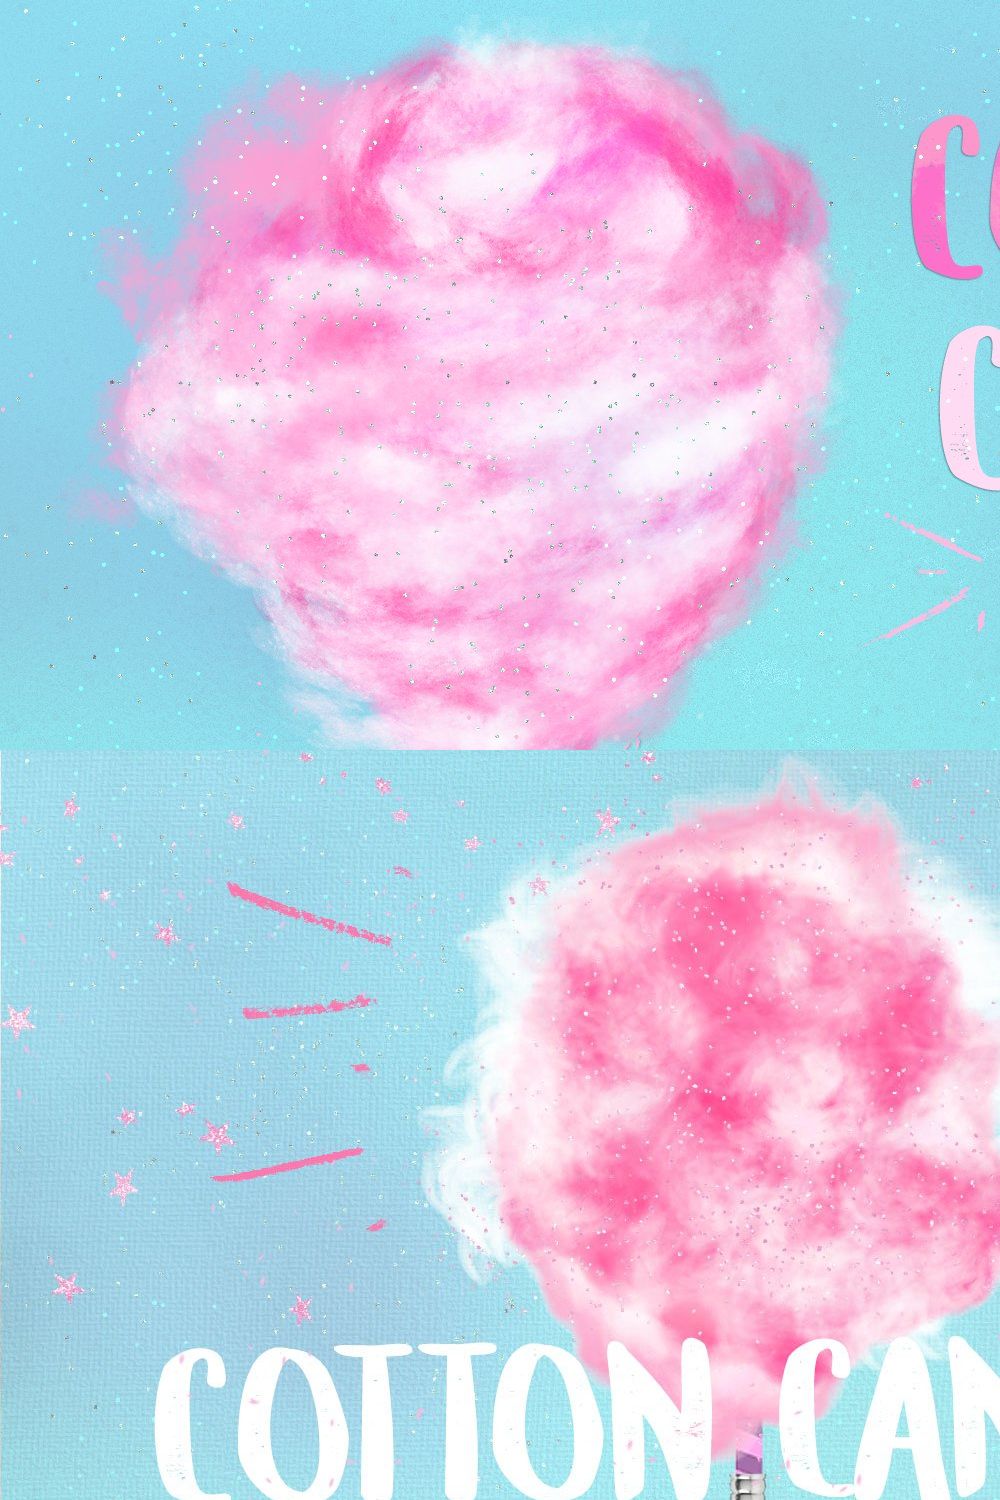 100 Cotton Candy Photoshop Brushes pinterest preview image.